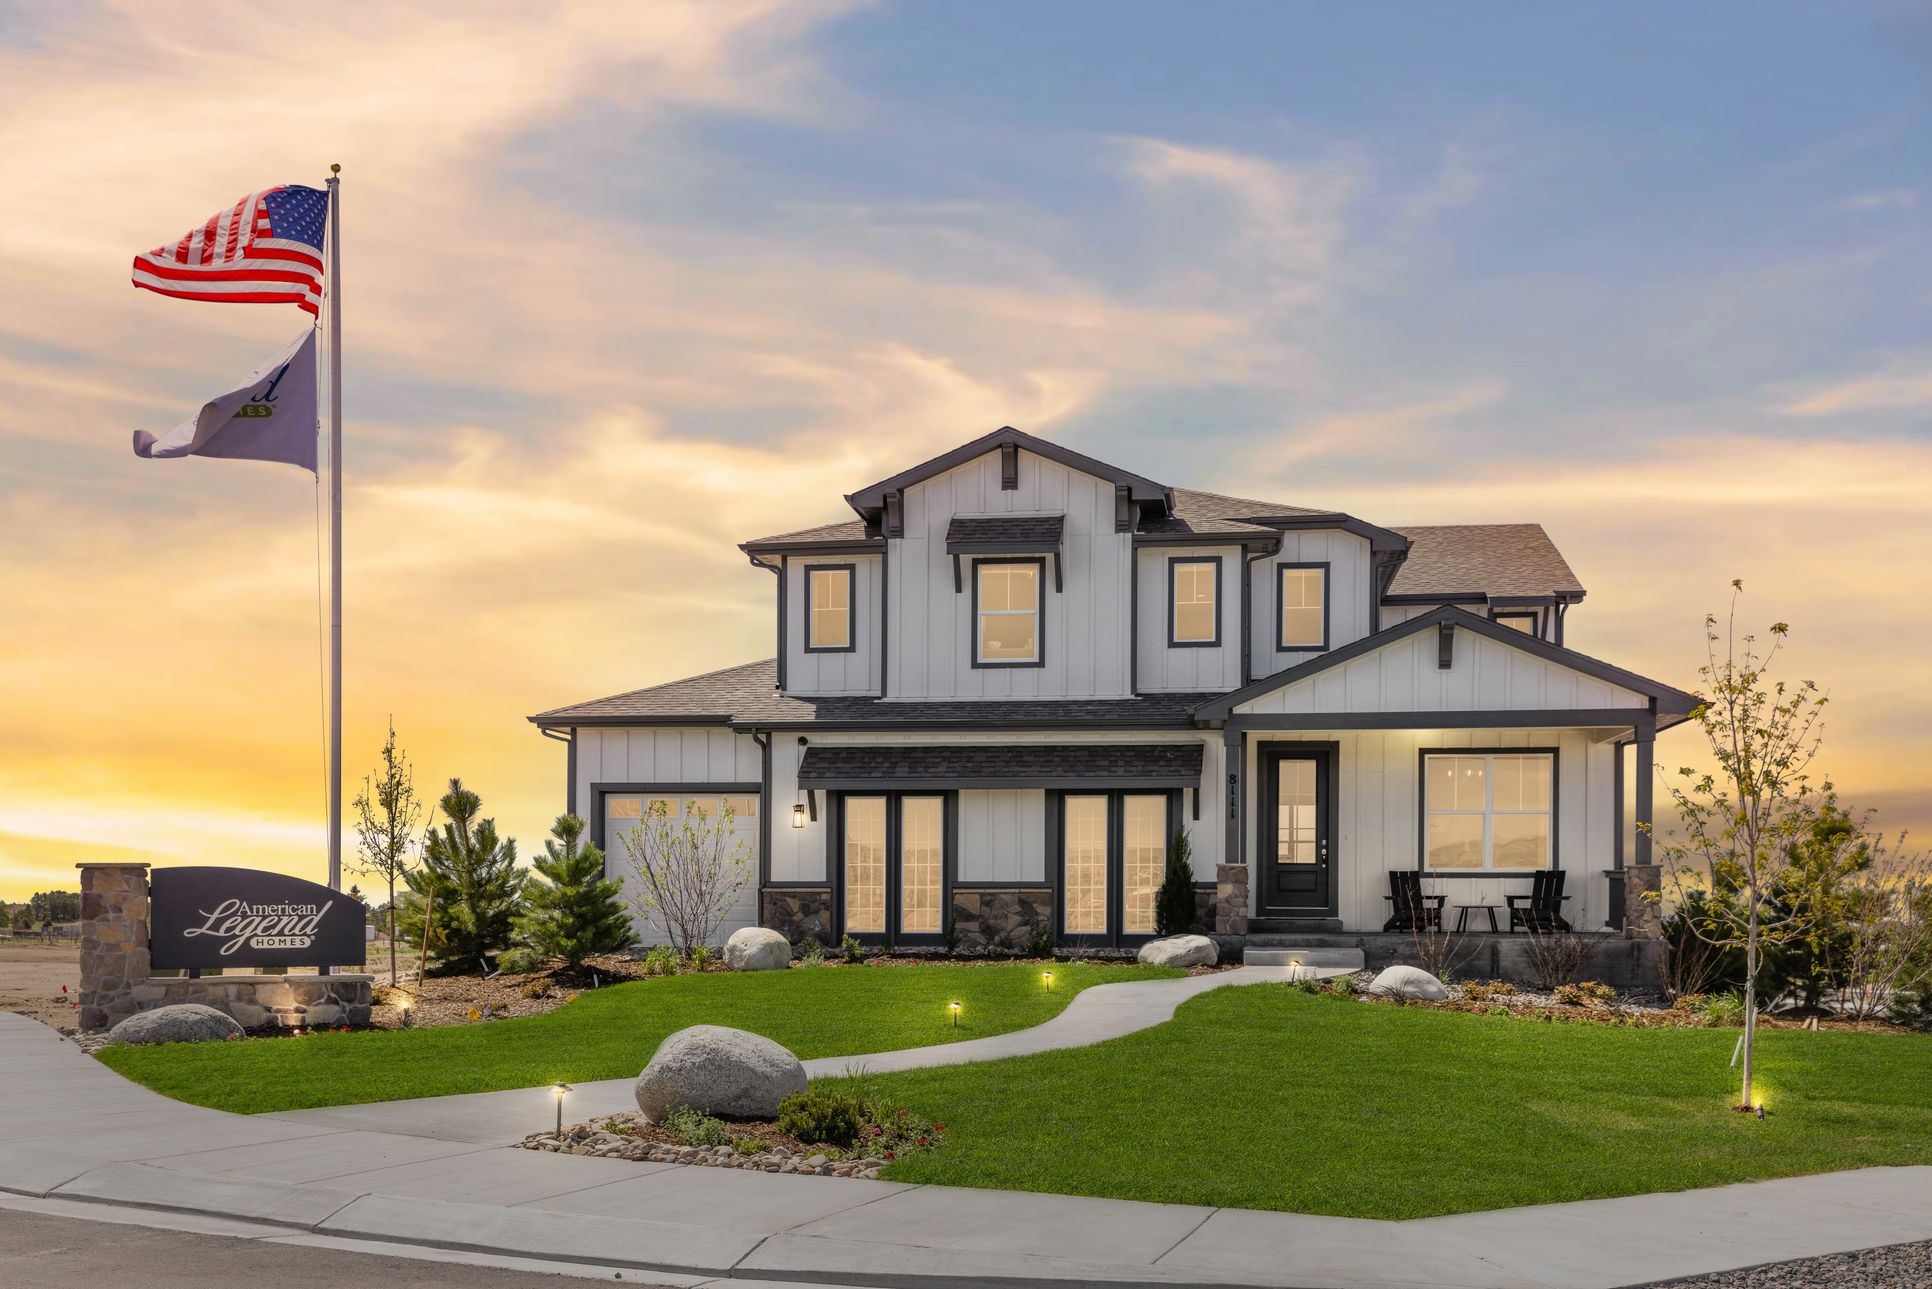 Plan C407 Front Elevation by American Legend Homes